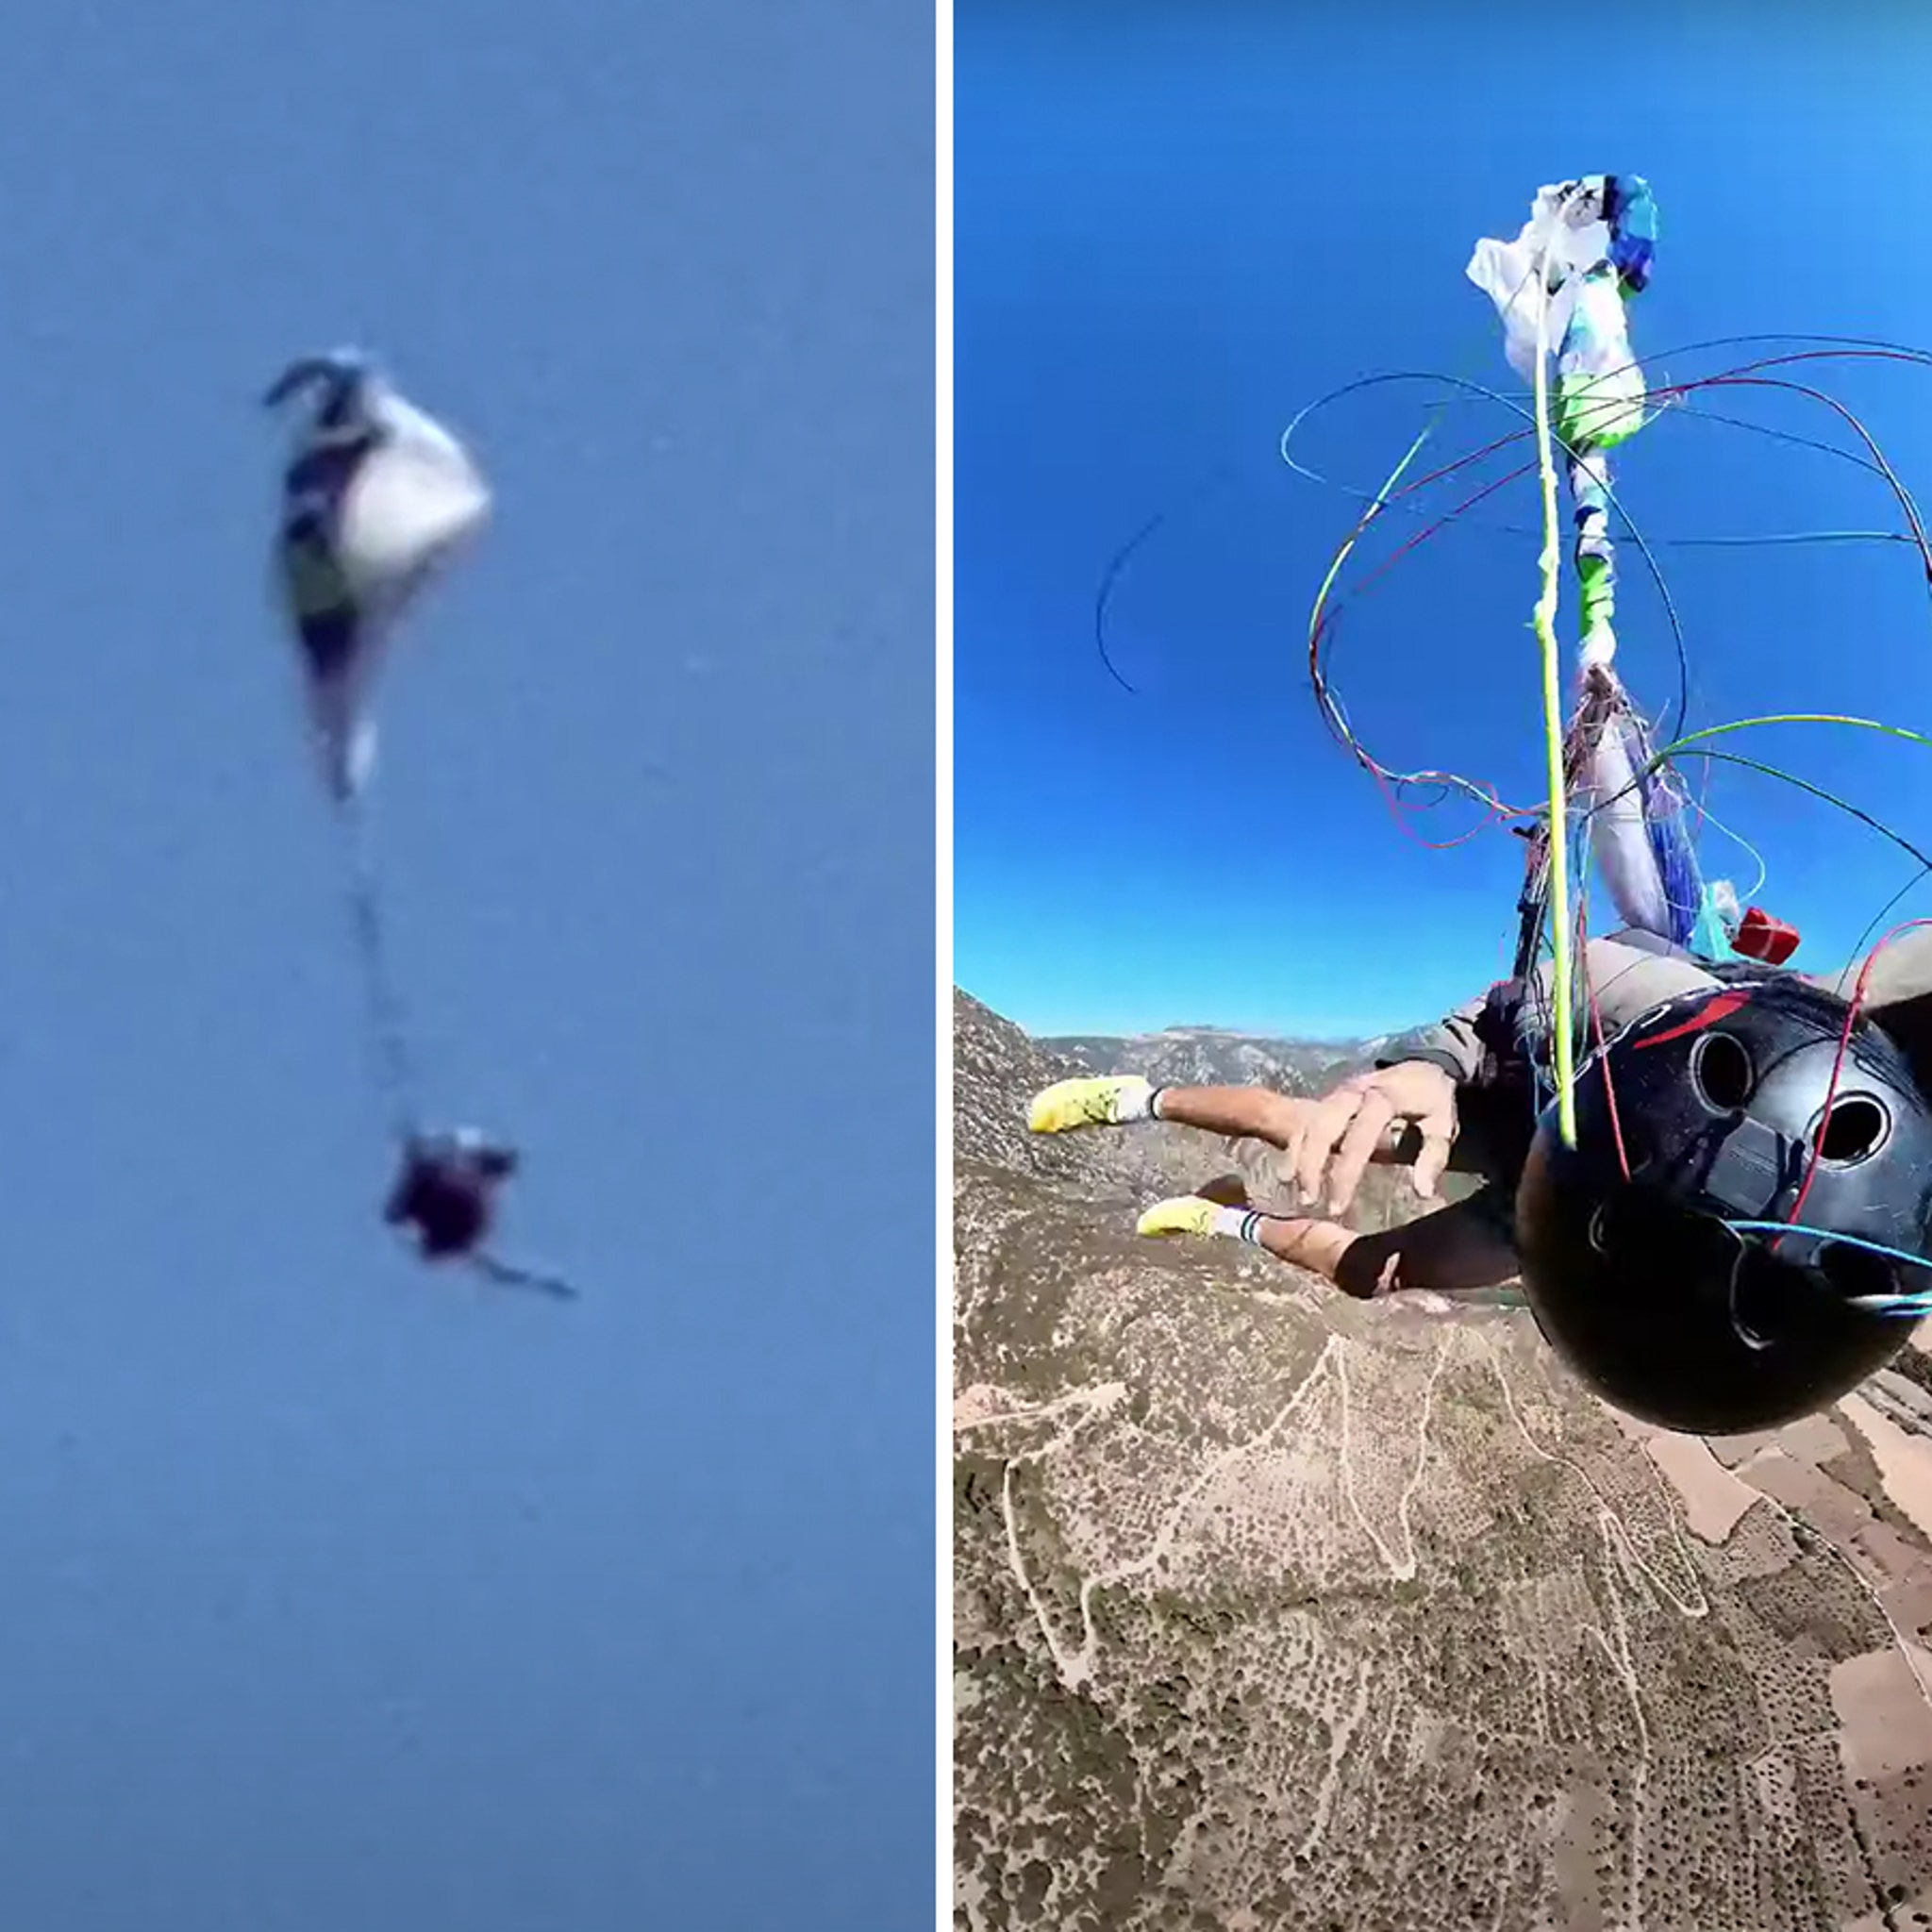 Paraglider Cheats Death, Saves Own Life One Second Before Impact In Terrifying Video